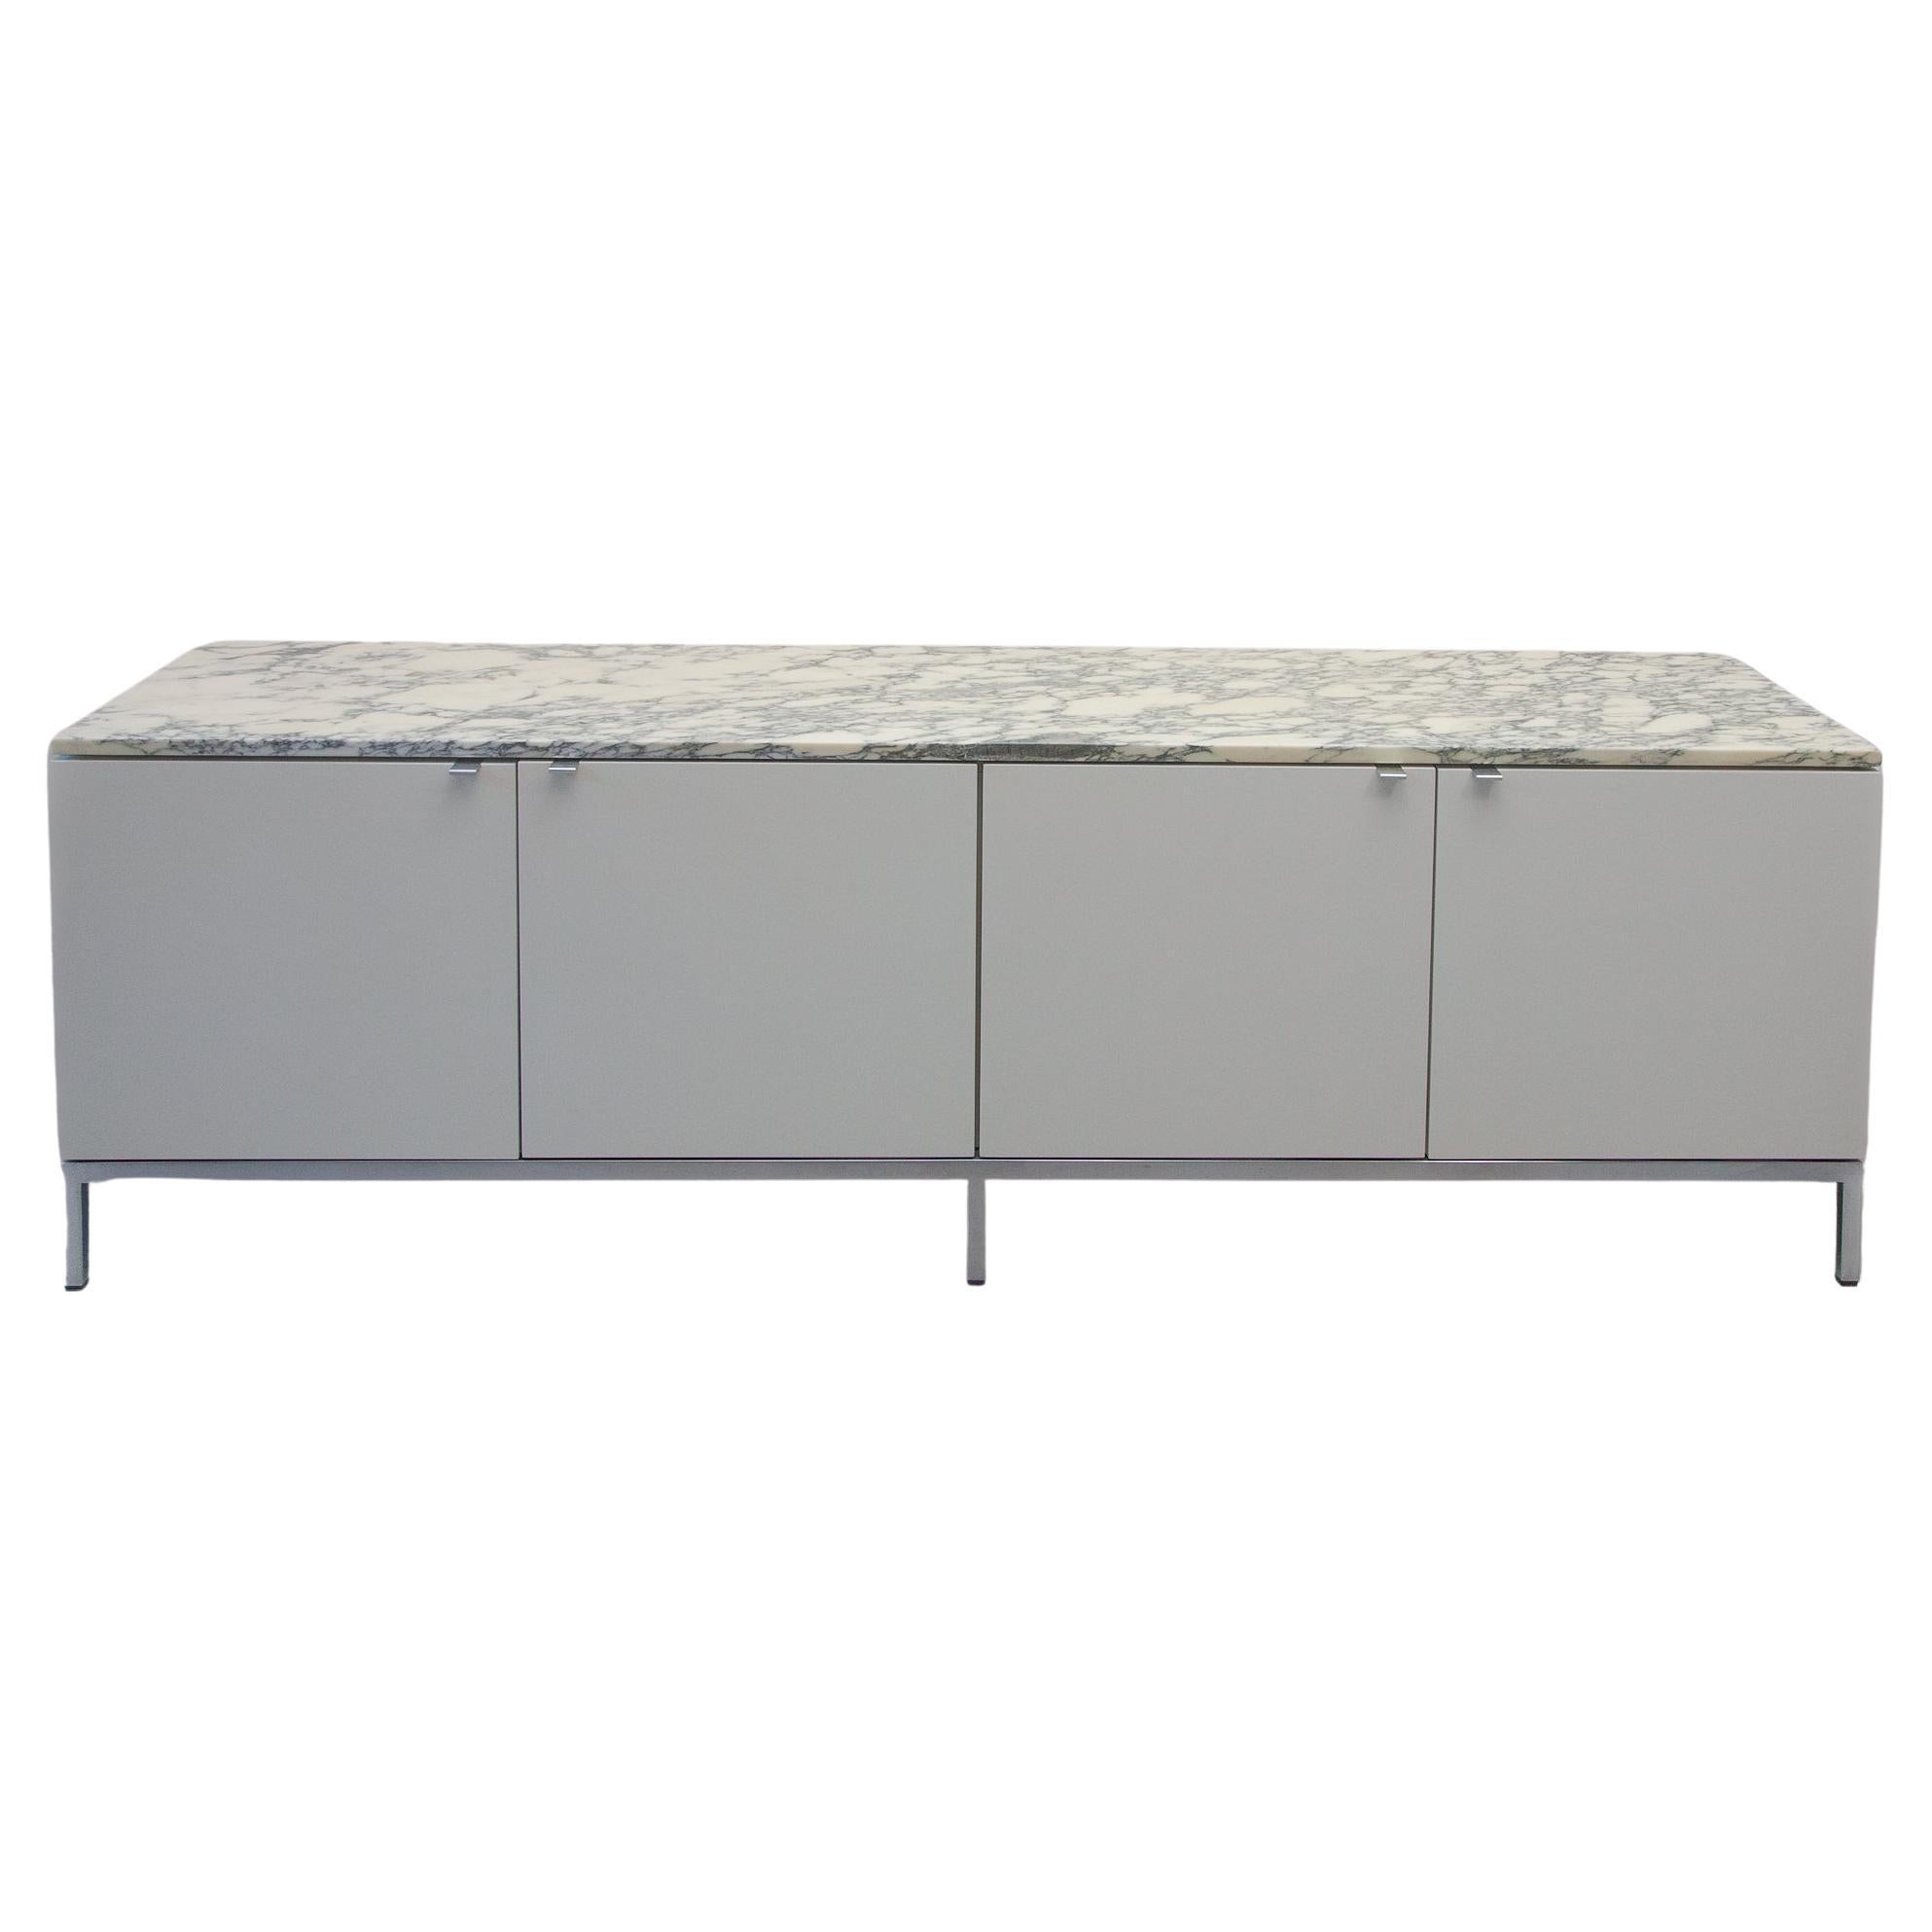 Minimalistic Freestanding  Four Doors Florence Knoll Marble Top Sideboard, 1961  For Sale